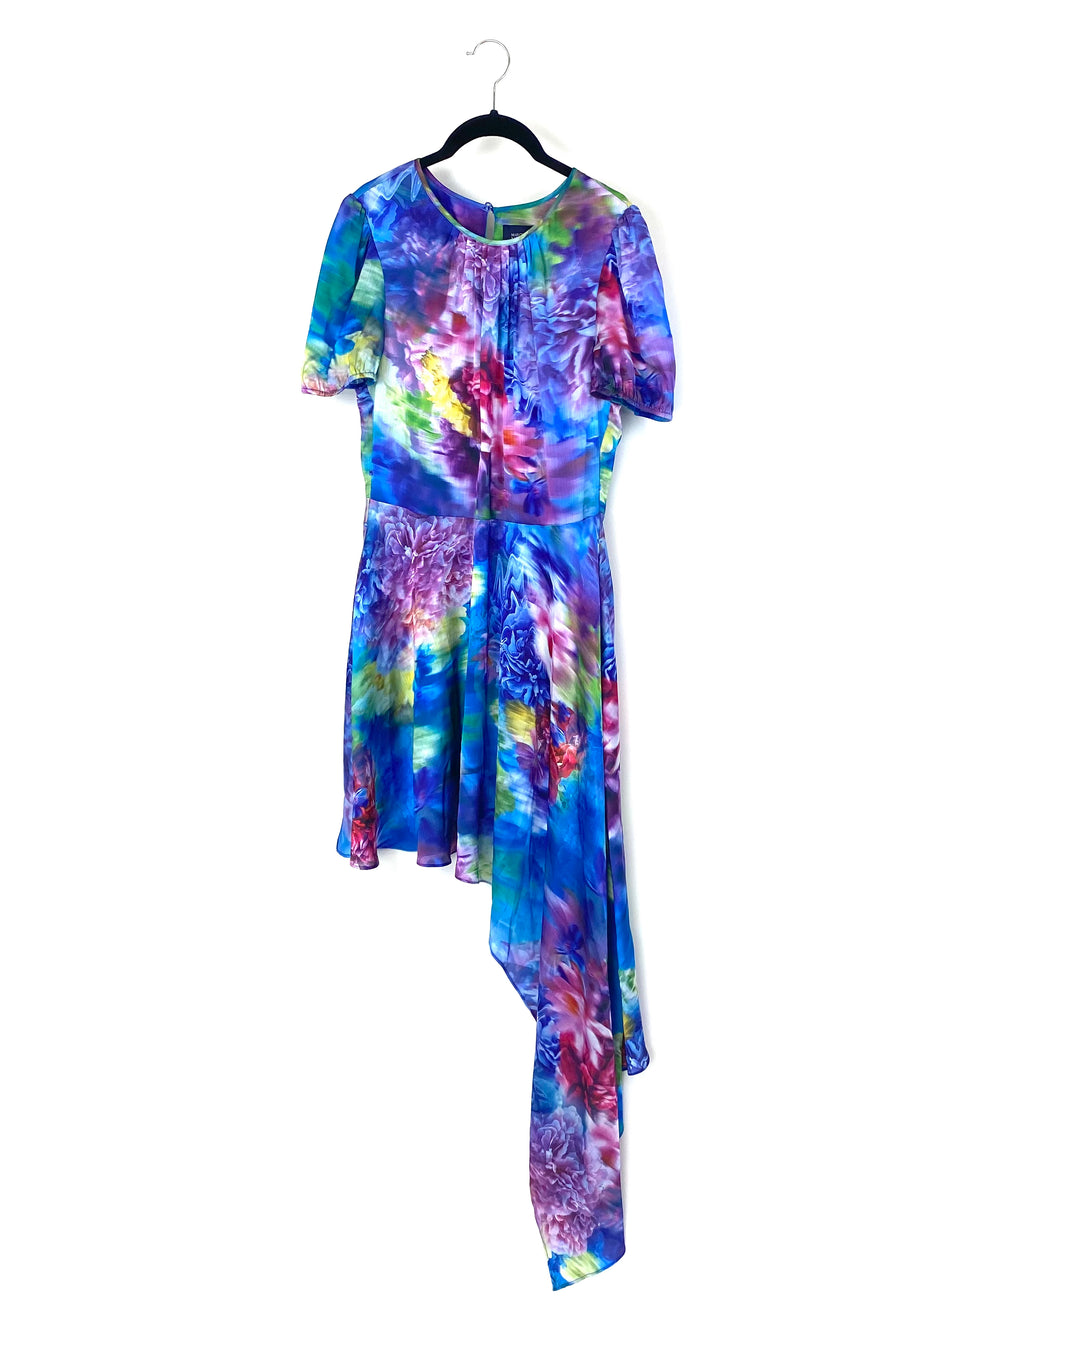 Colorful Floral Asymmetrical Dress - Small